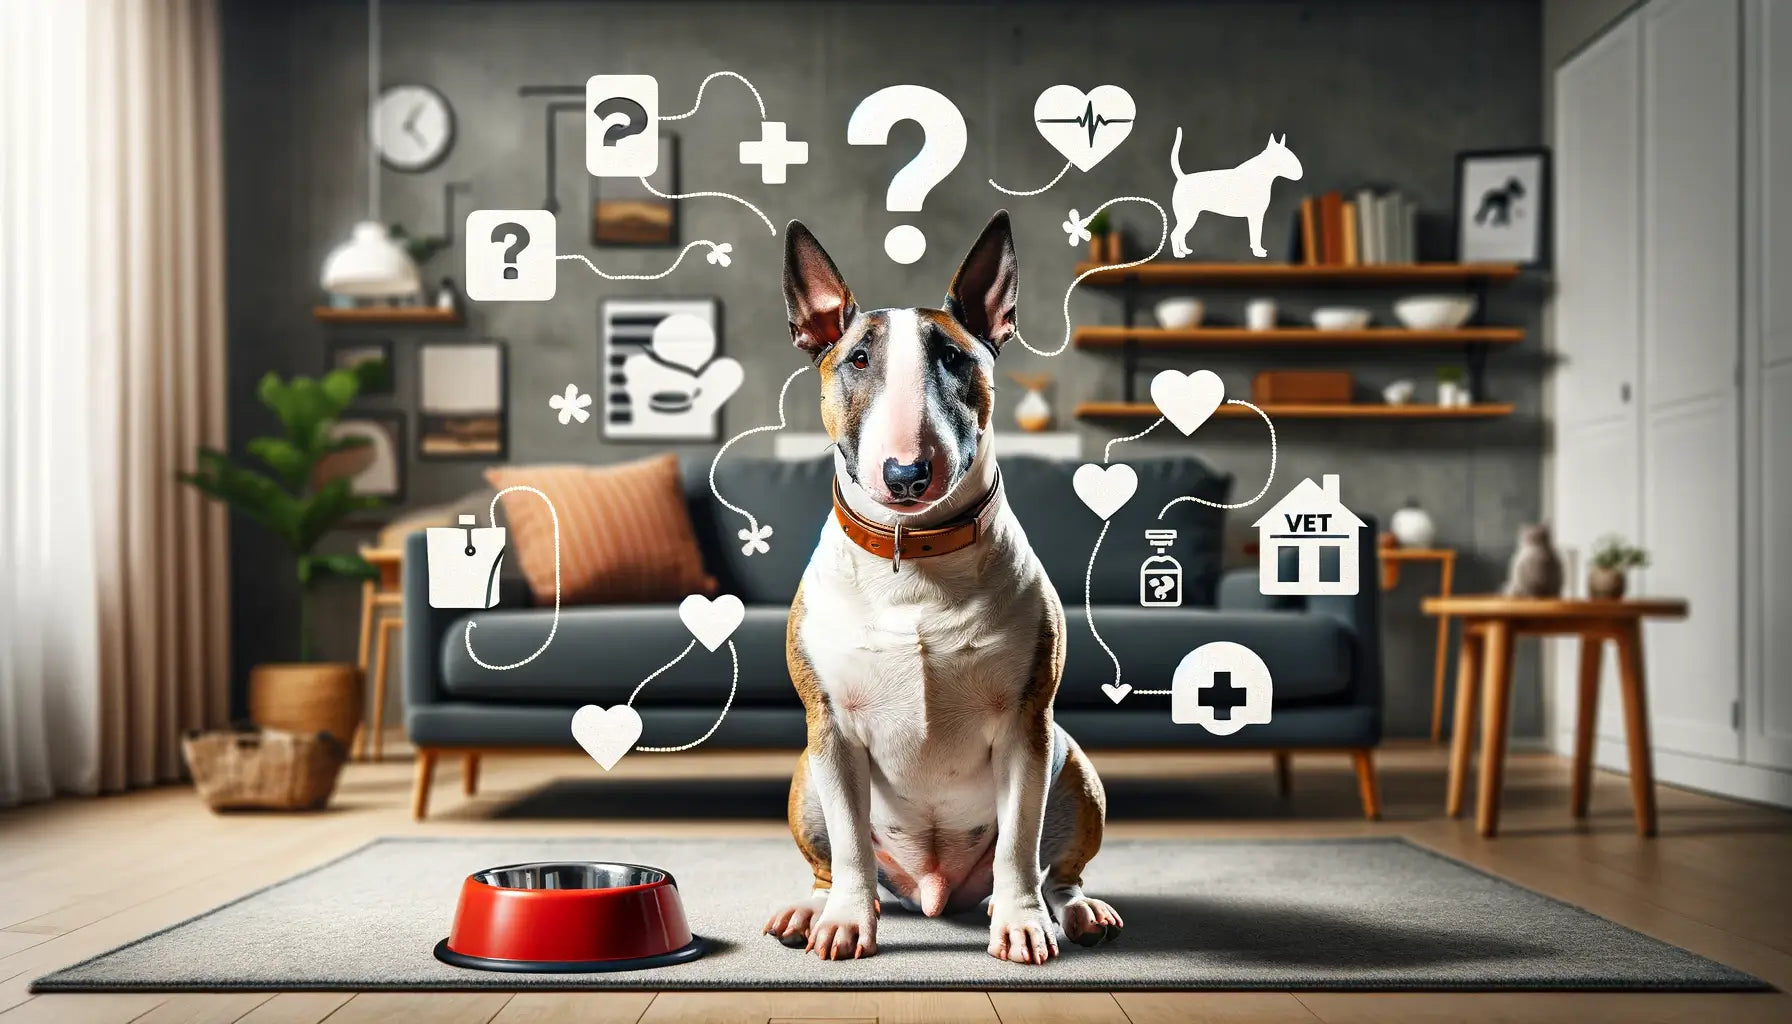 A Bull Terrier sits attentively in a home setting with a question mark above its head, symbolizing curiosity and the quest for knowledge.